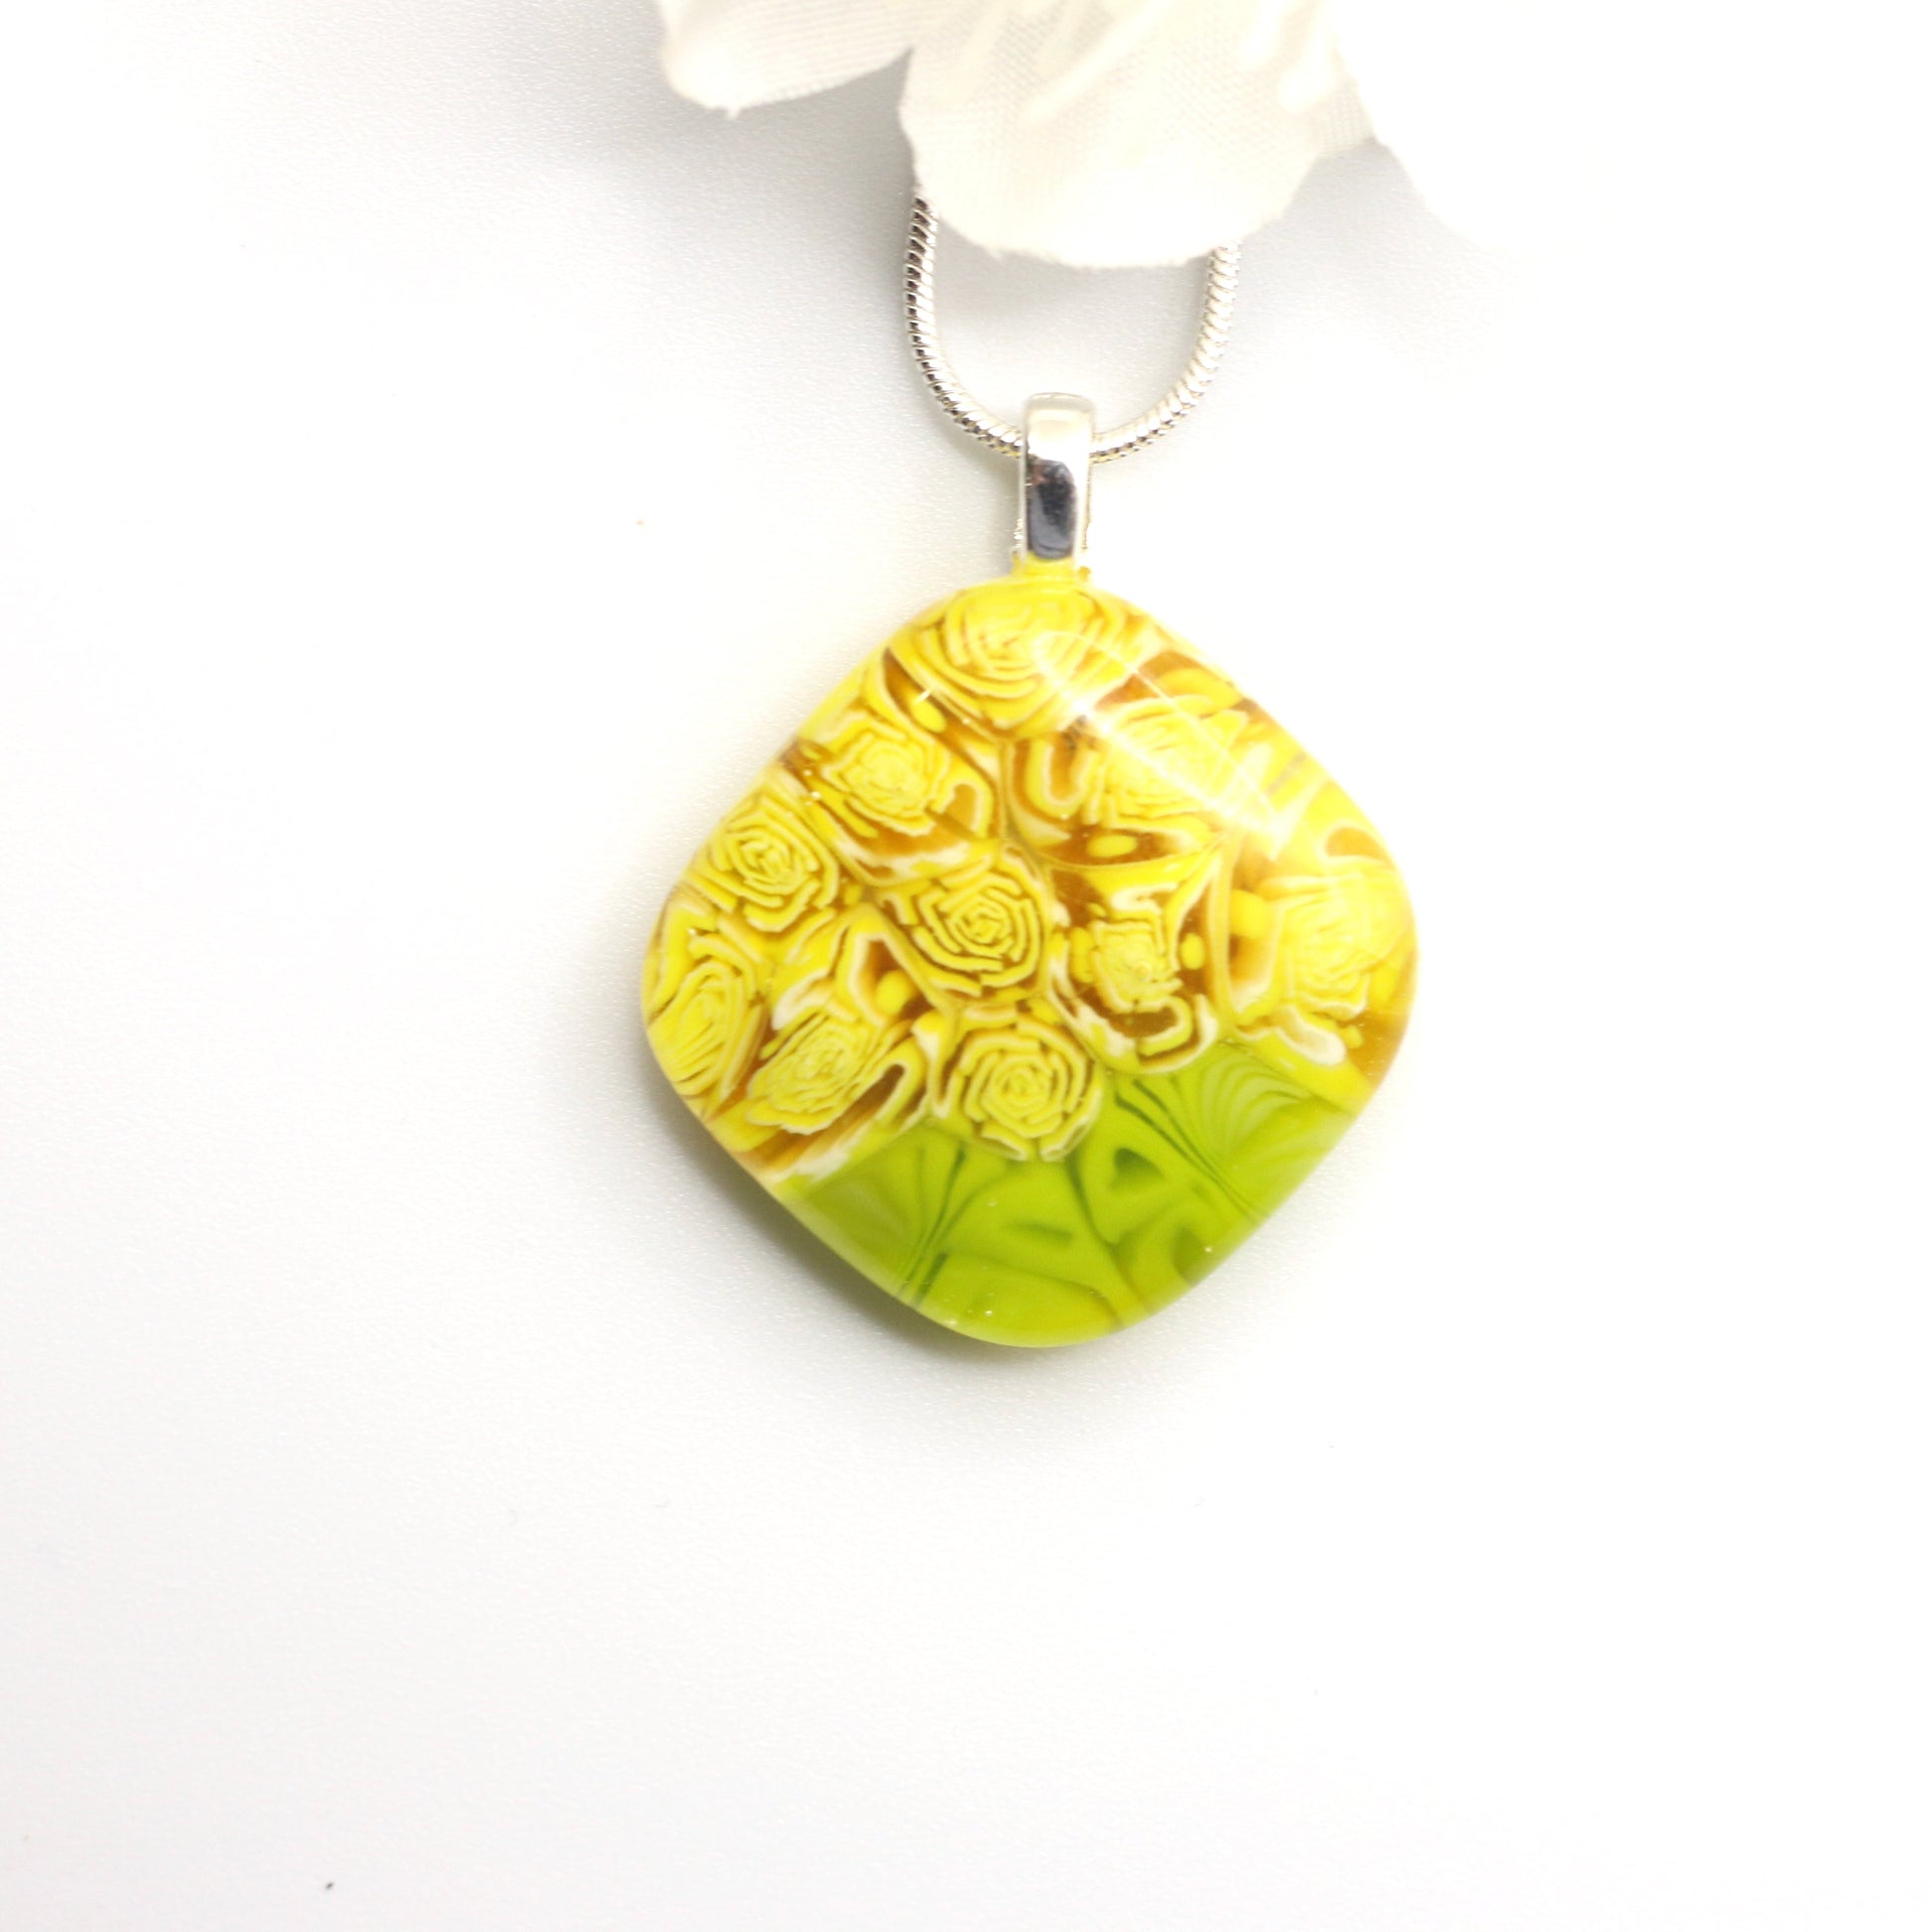 Deep Roses Fused Glass Necklace - 3670